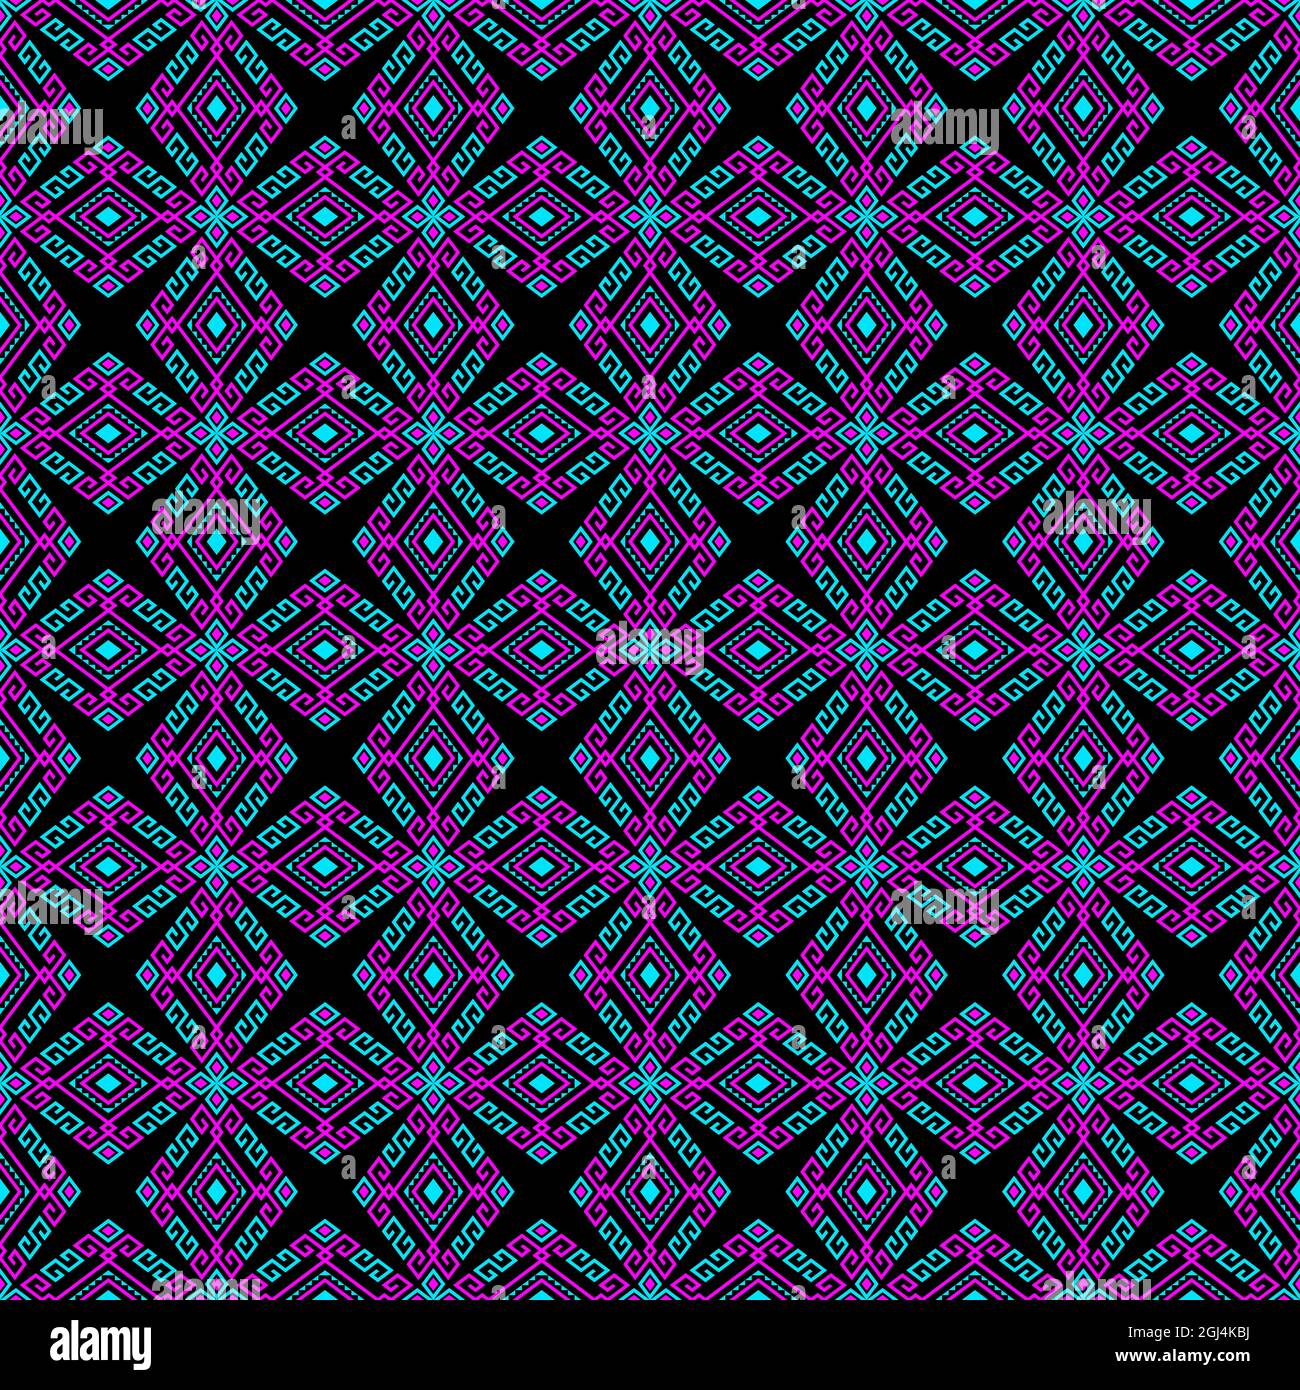 Magenta Turquoise Tribal or Native Seamless Pattern on Black